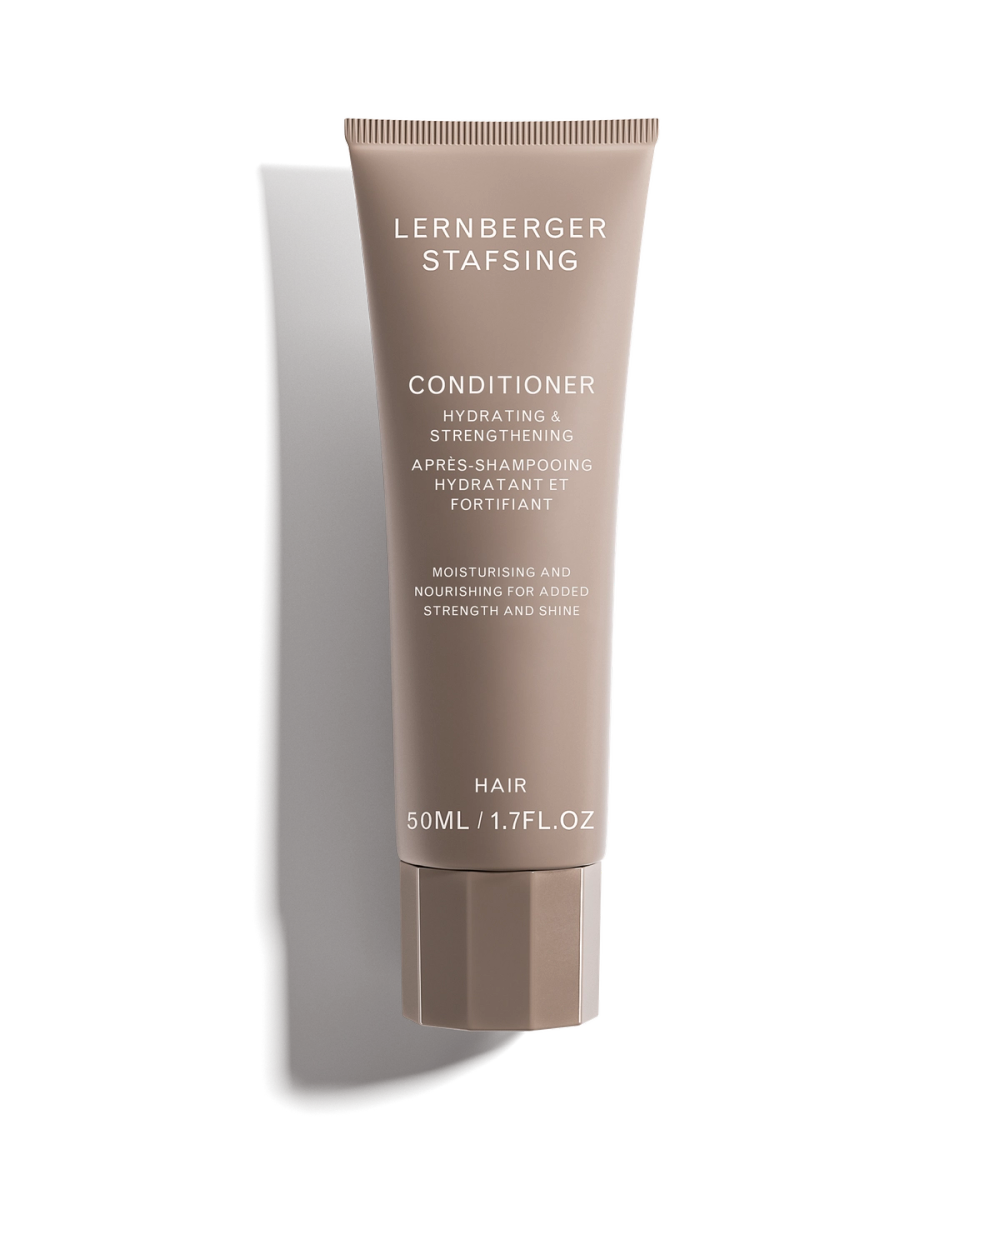 CONDITIONER HYDRATING & STRENGTHENING